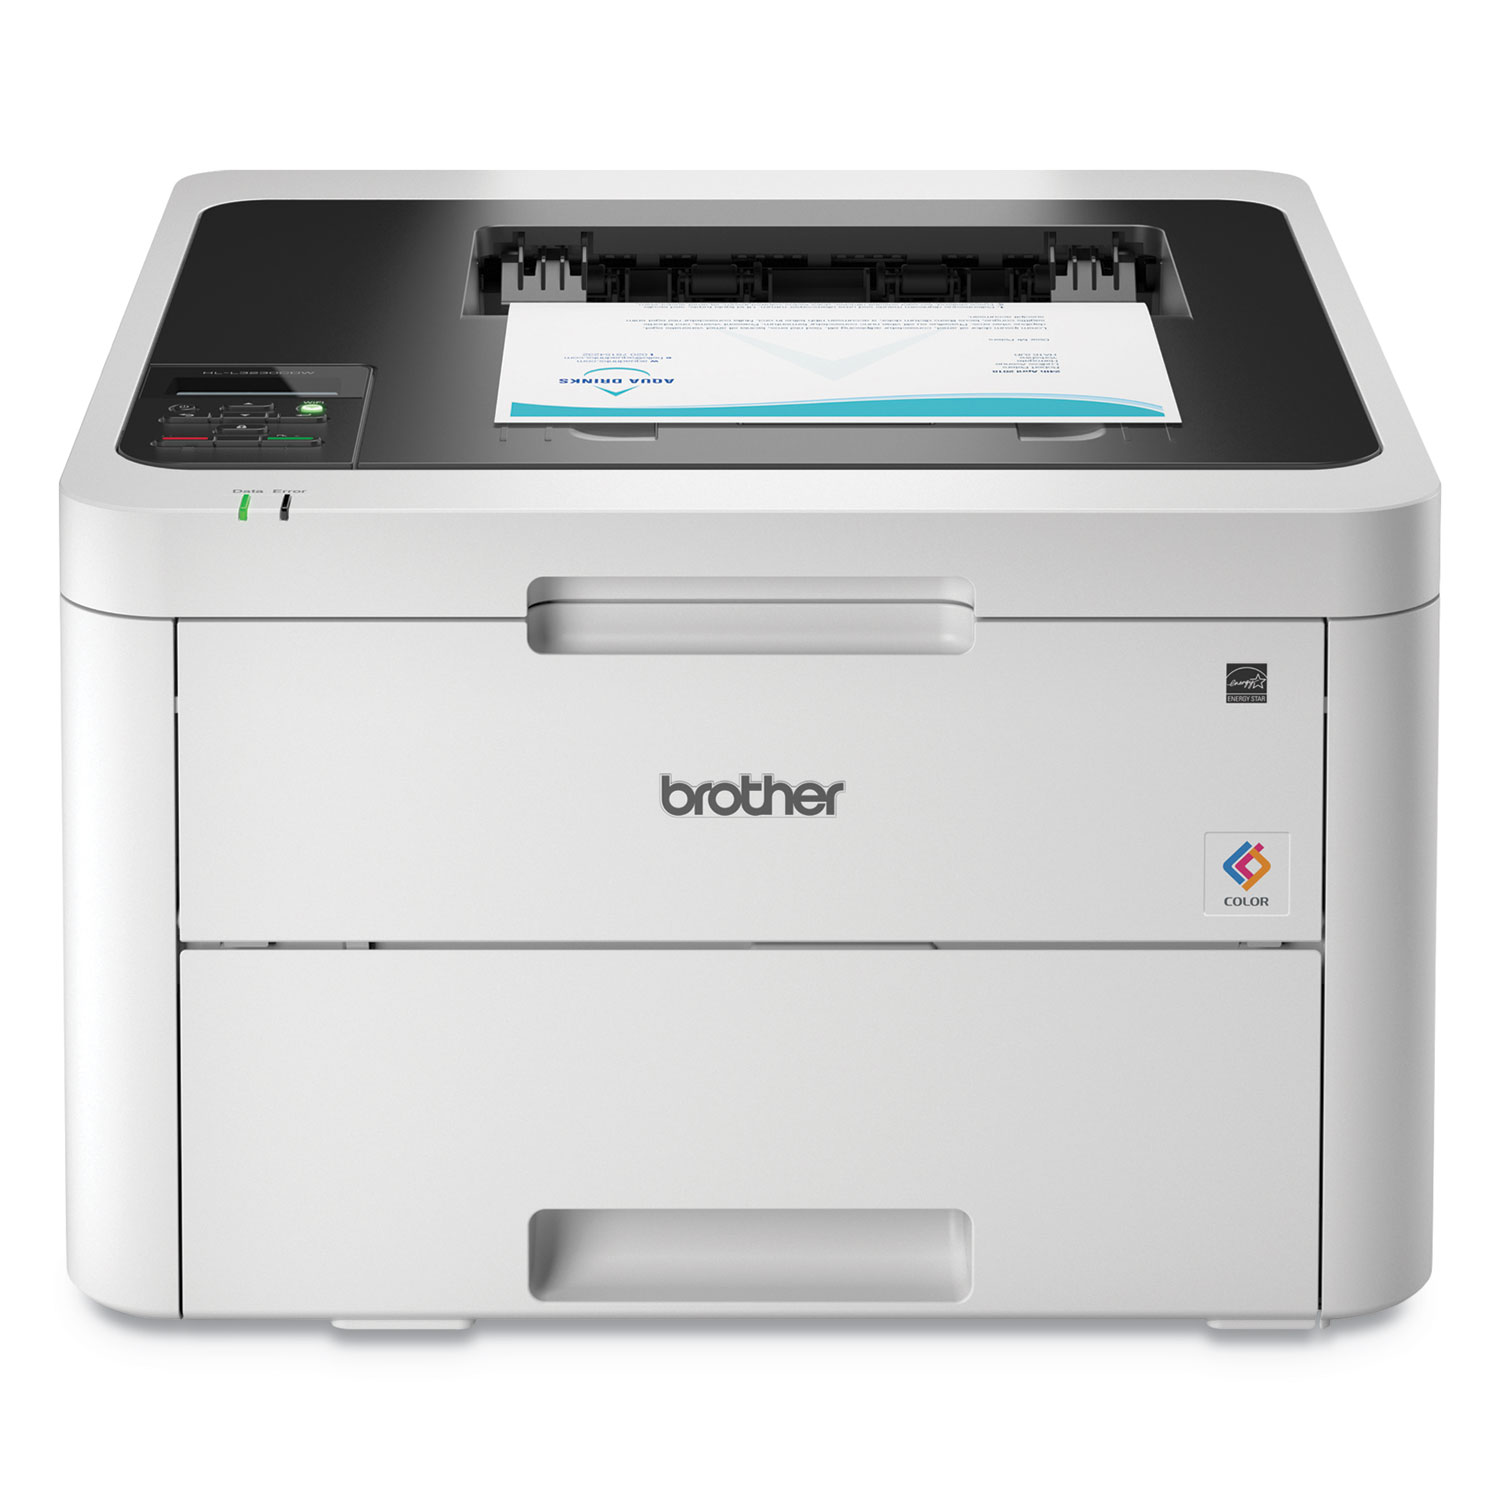  Brother HLL3230CDW HLL3230CDW Compact Digital Color Printer with Wireless and Duplex Printing (BRTHLL3230CDW) 